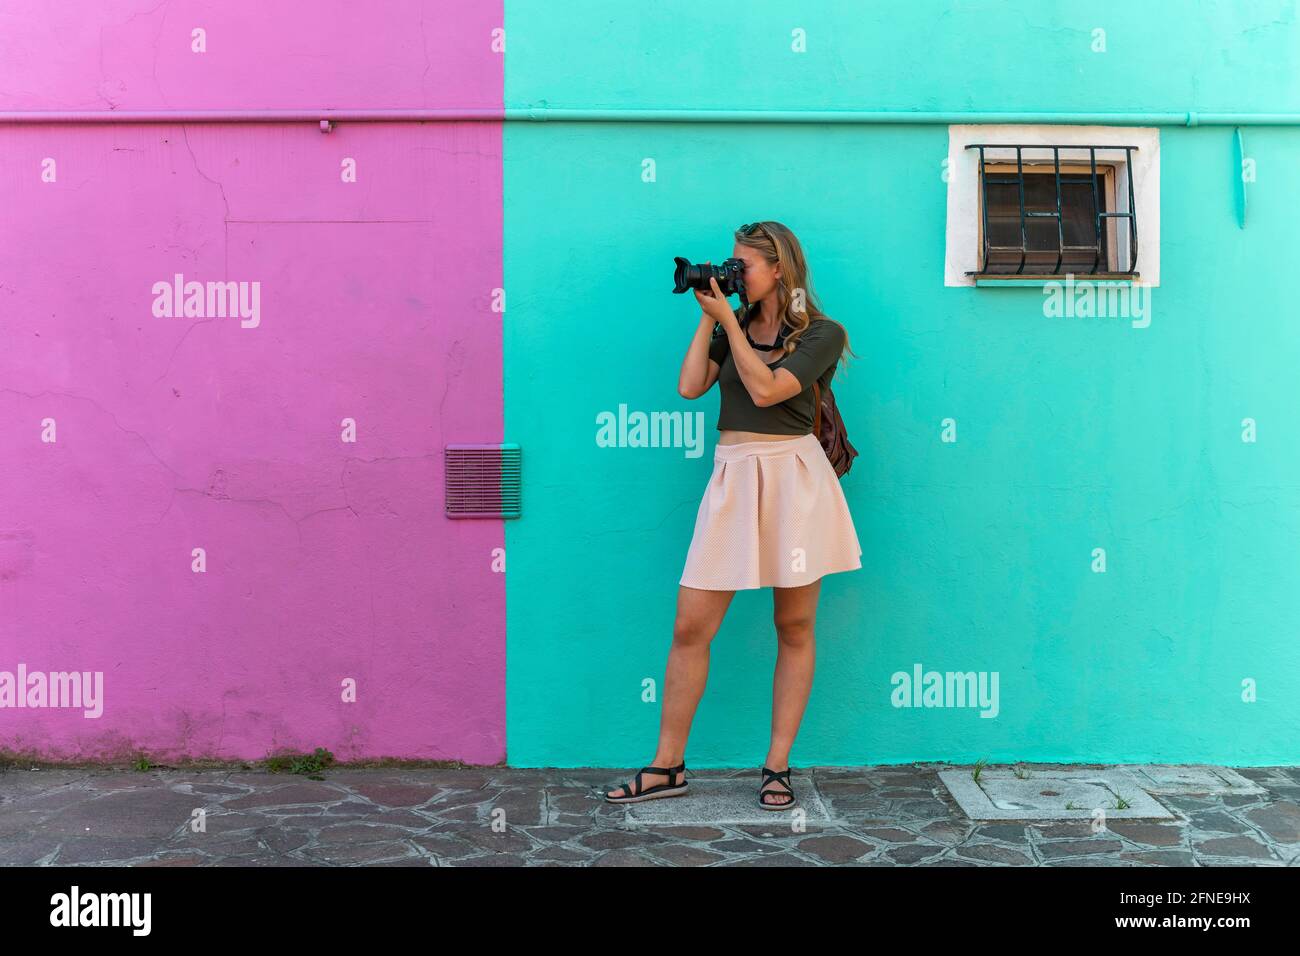 Young woman in front of colorful house, pink and turquoise house facade, tourist photographed on Burano Island, Venice, Veneto, Italy Stock Photo